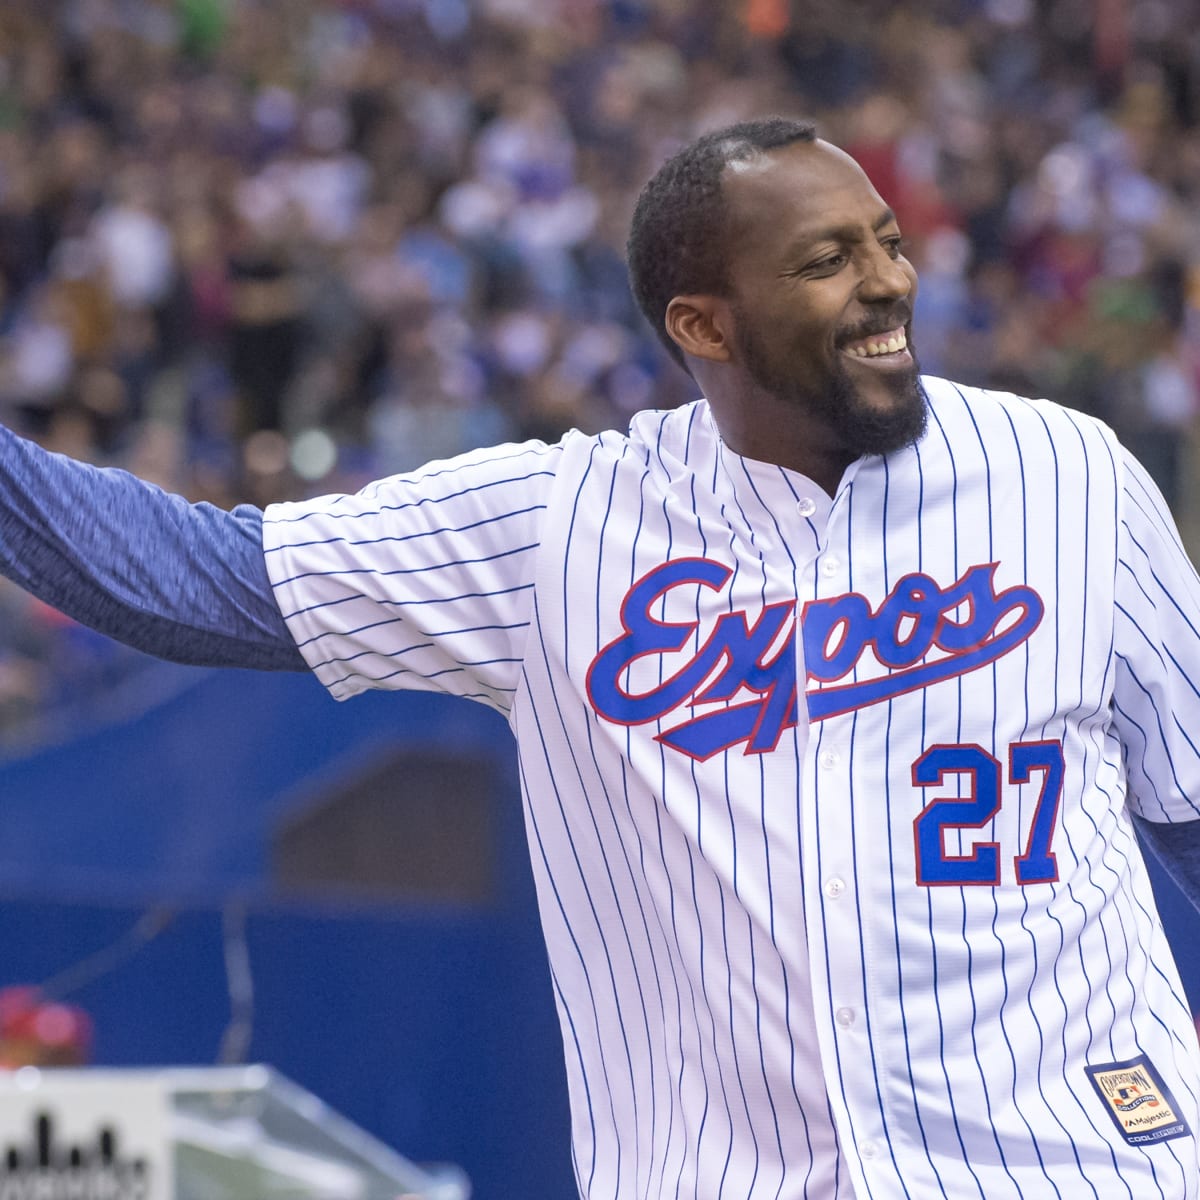 The 9 greatest players in Expos/Nationals history